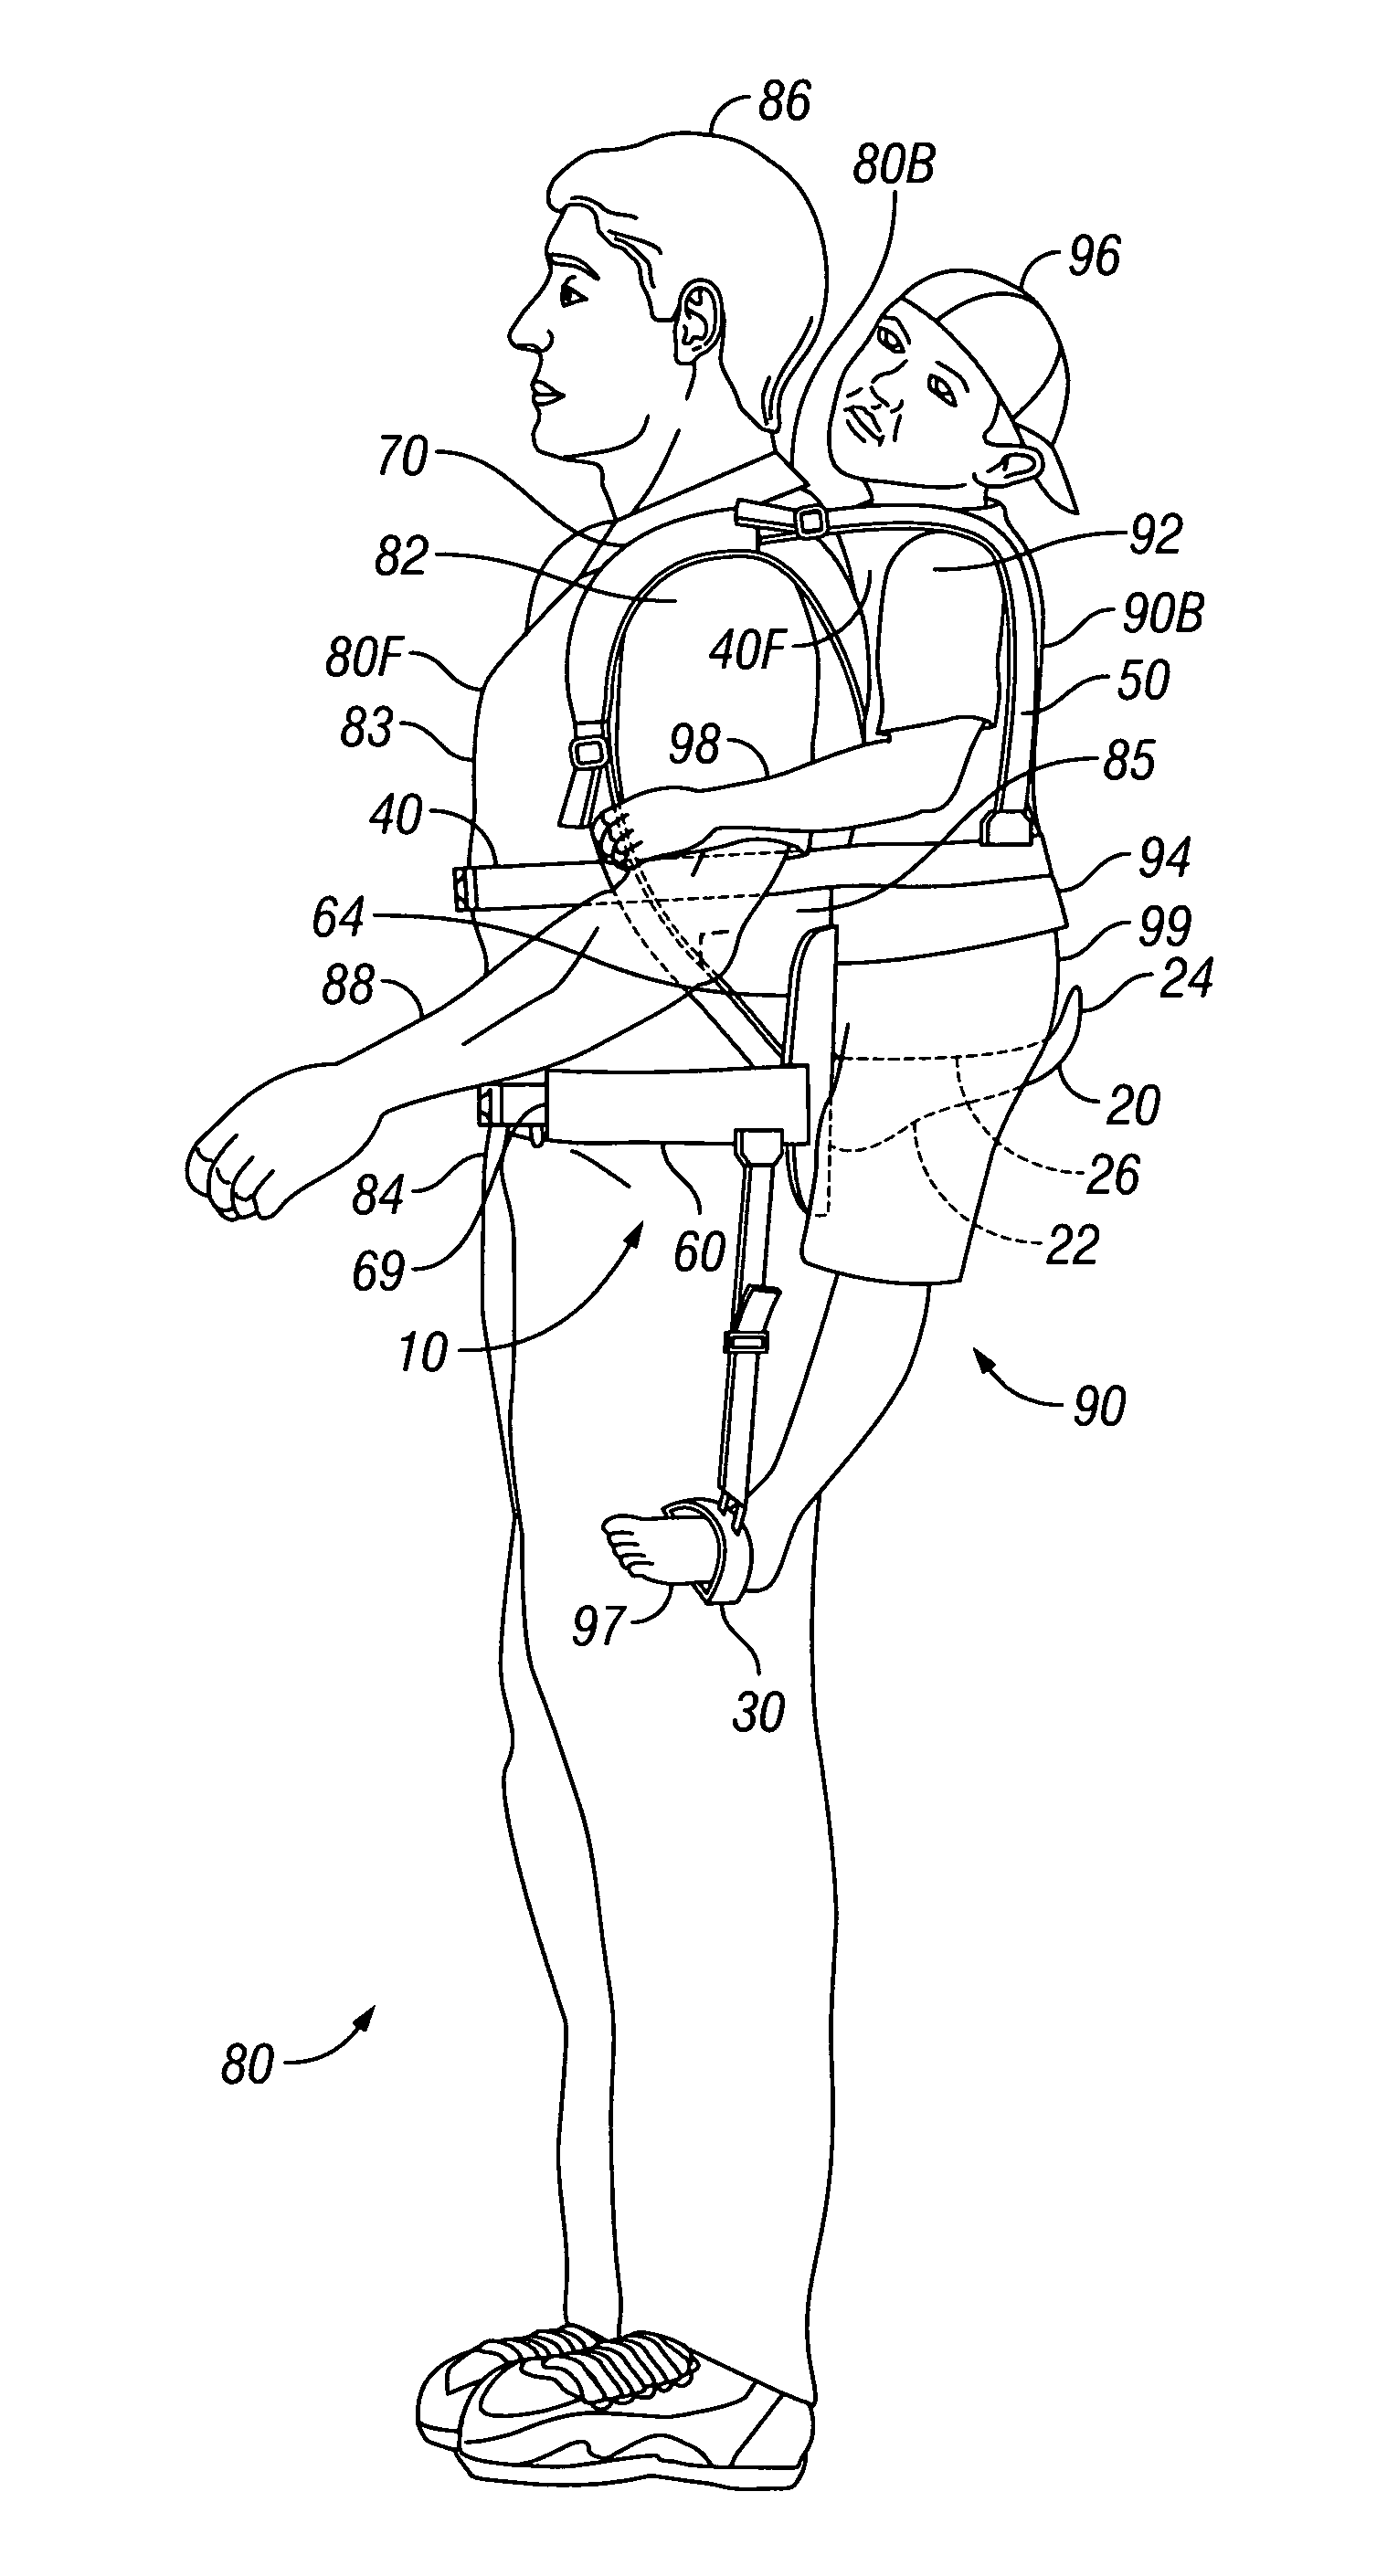 Device for carrying toddlers and small children on an adult wearer's back